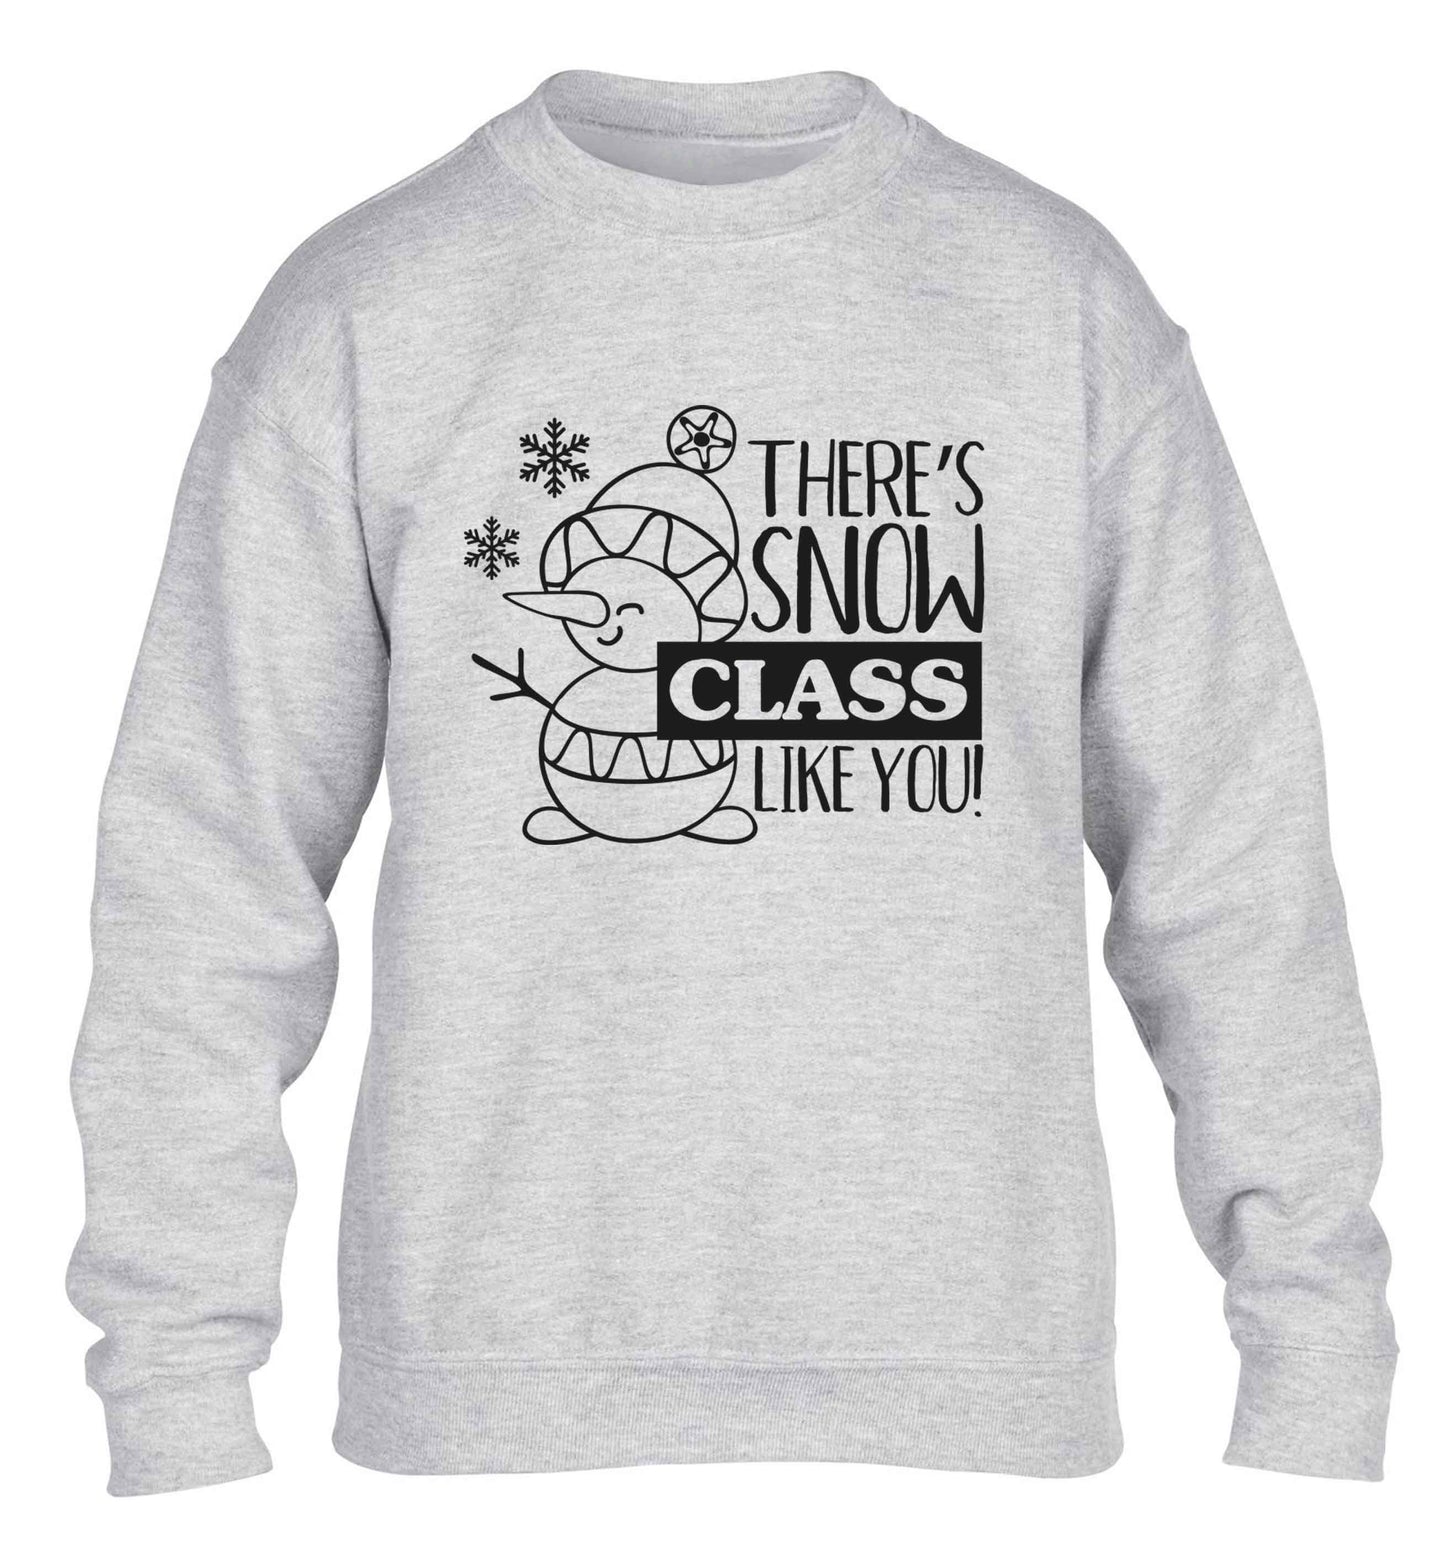 There's snow class like you children's grey sweater 12-13 Years